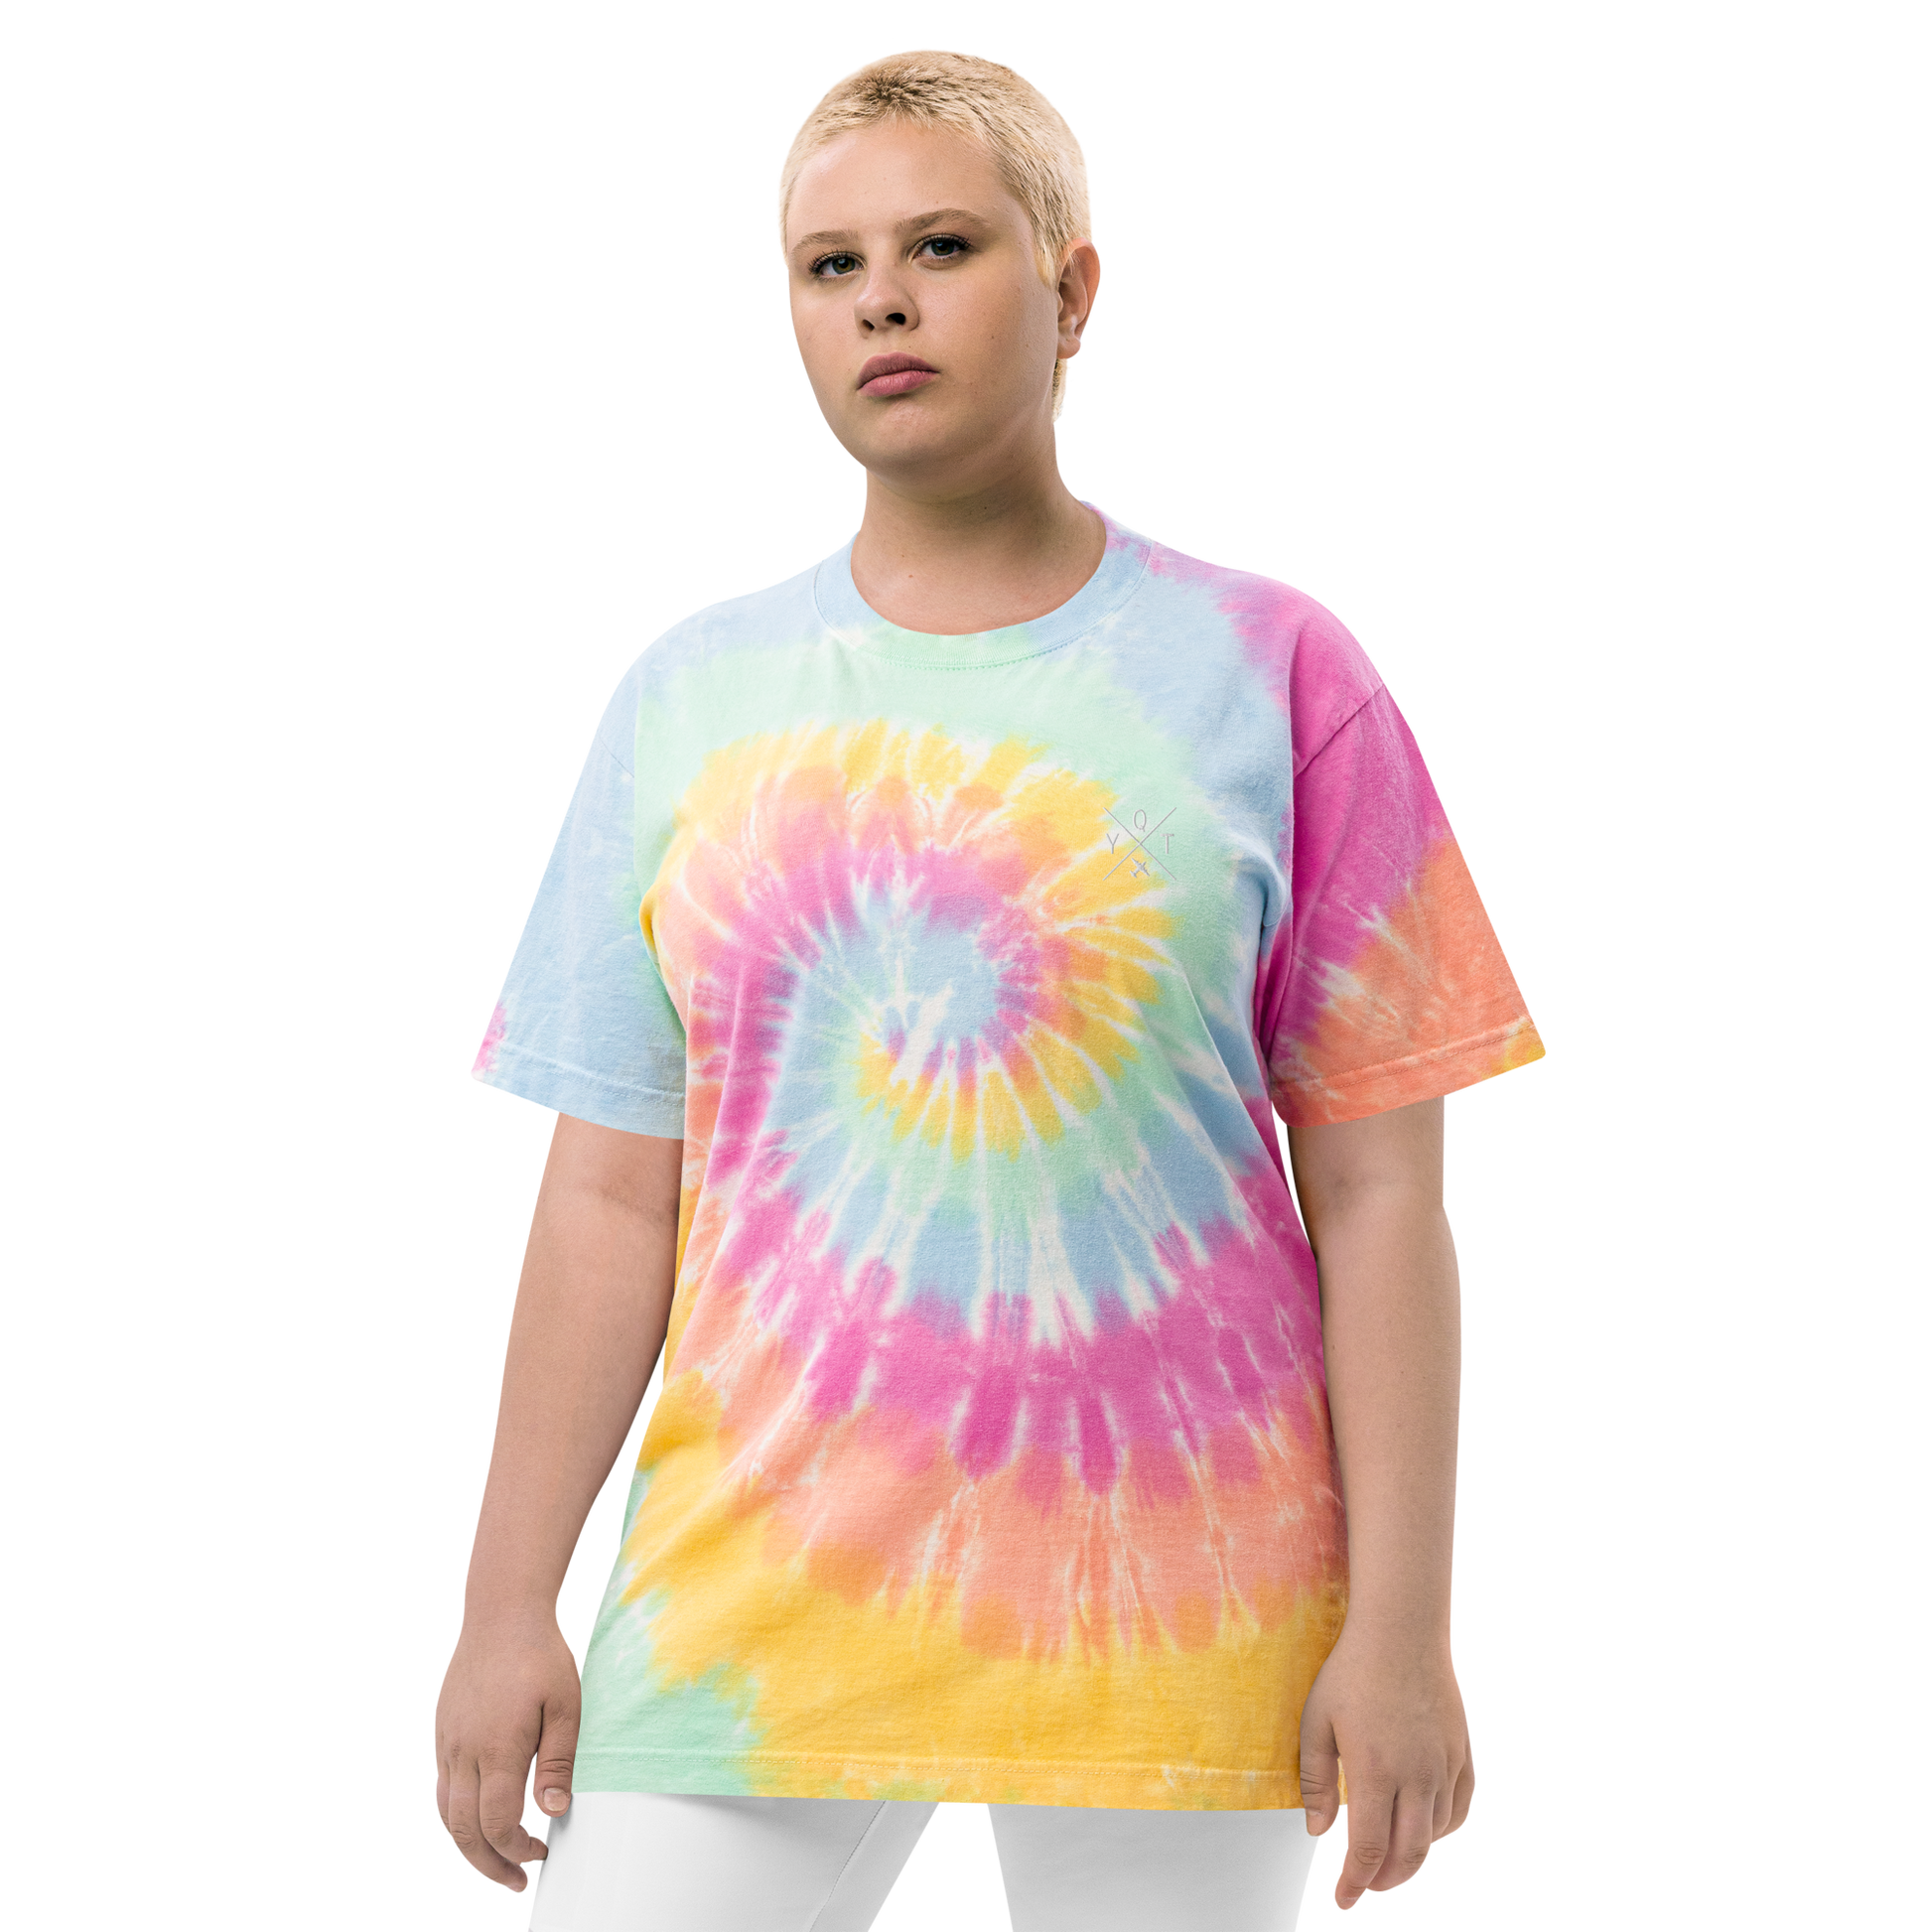 YHM Designs - YQT Thunder Bay Oversized Tie-Dye T-Shirt - Crossed-X Design with Airport Code and Vintage Propliner - White Embroidery - Image 11